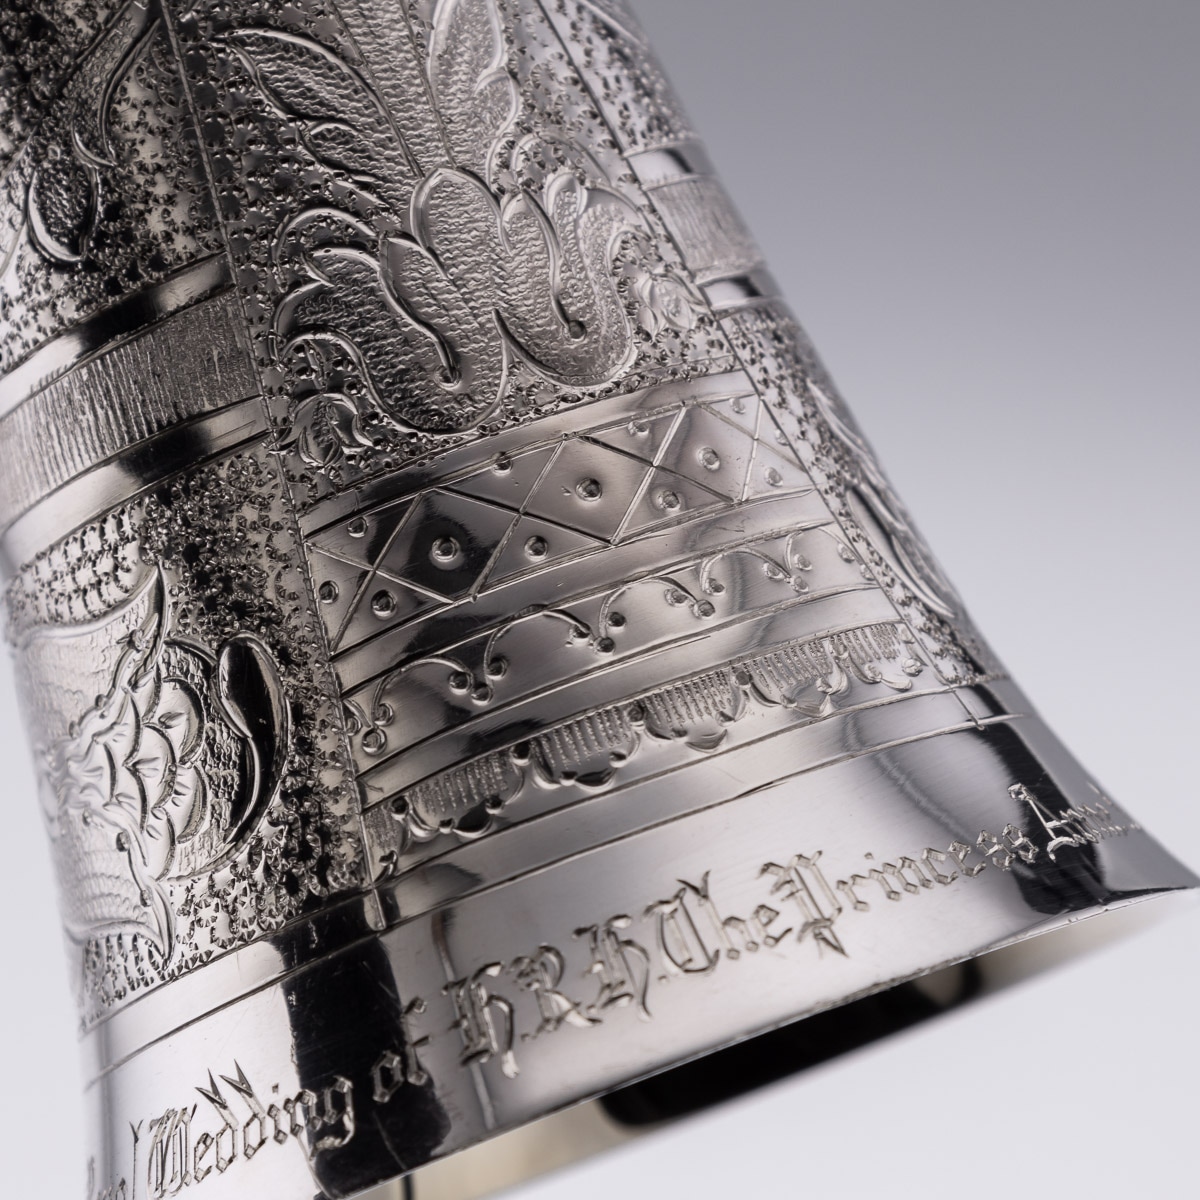 A ROYAL WEDDING SOLID STERLING SILVER NOVELTY WAGER CUP, LONDON, C. 1973 - Image 19 of 23